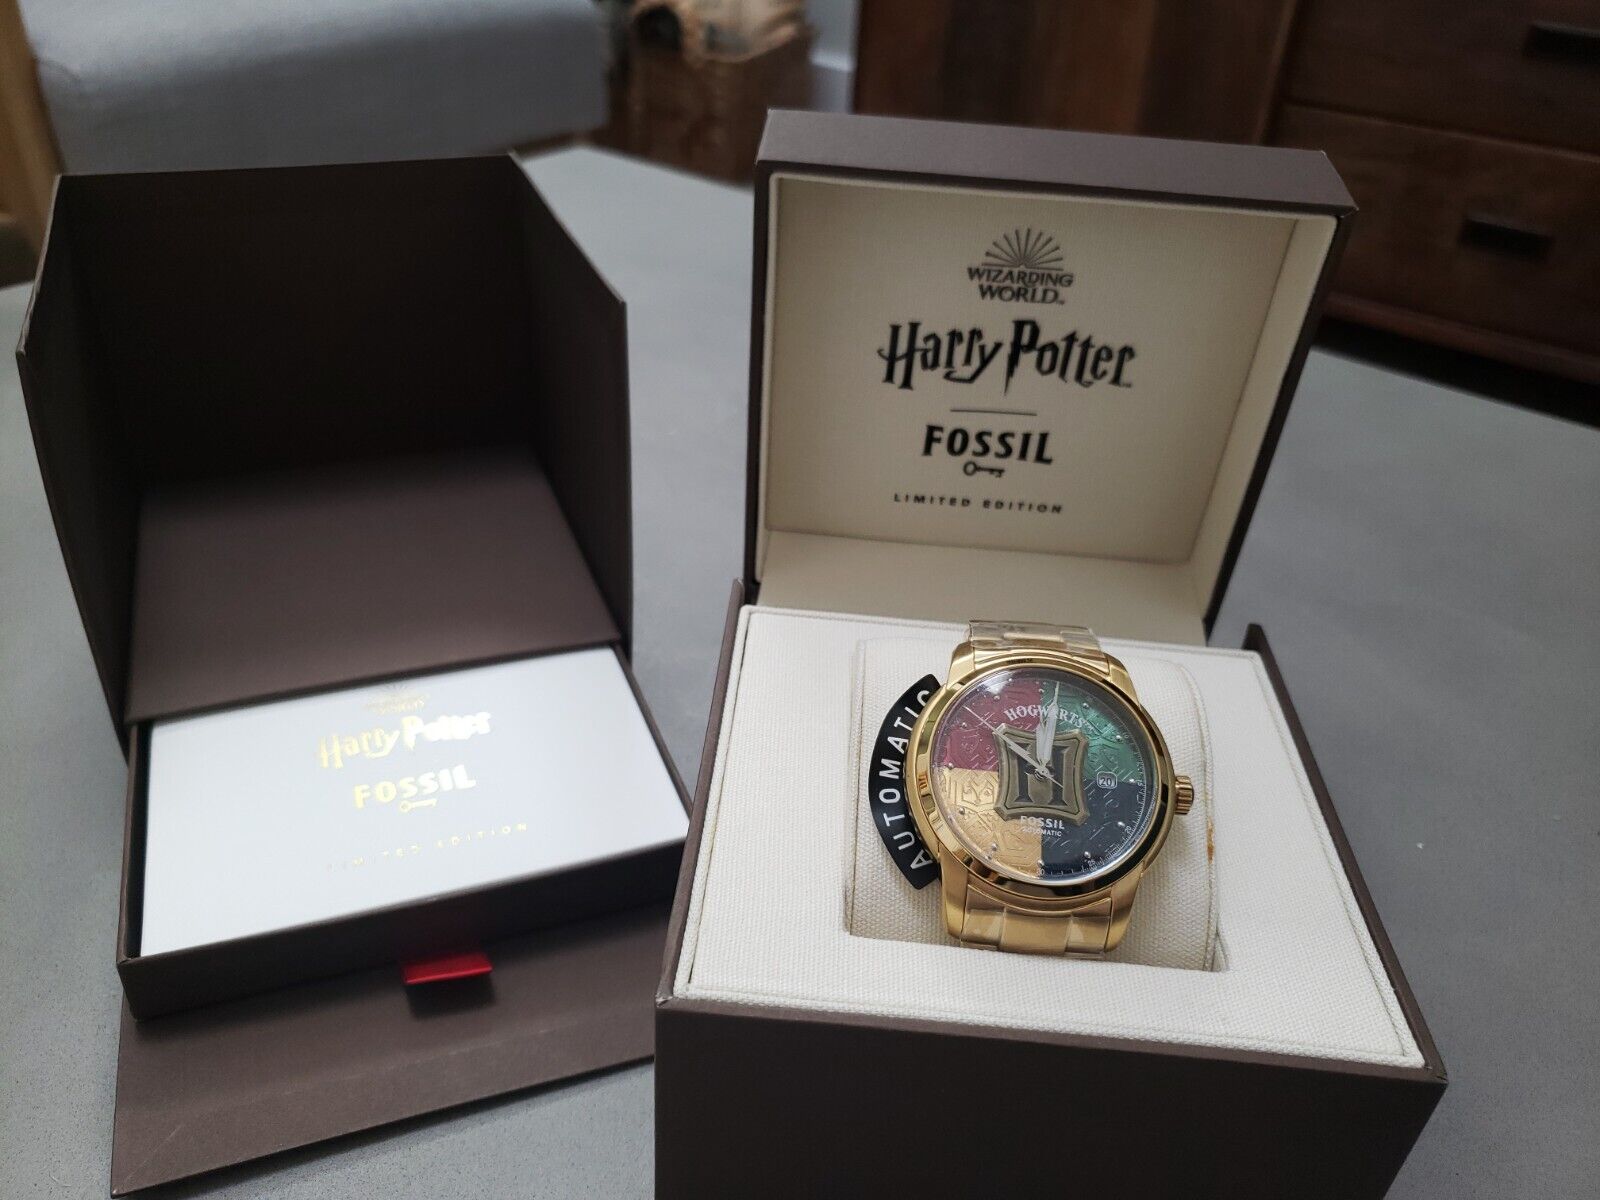 Harry Potter x Fossil - Fossil